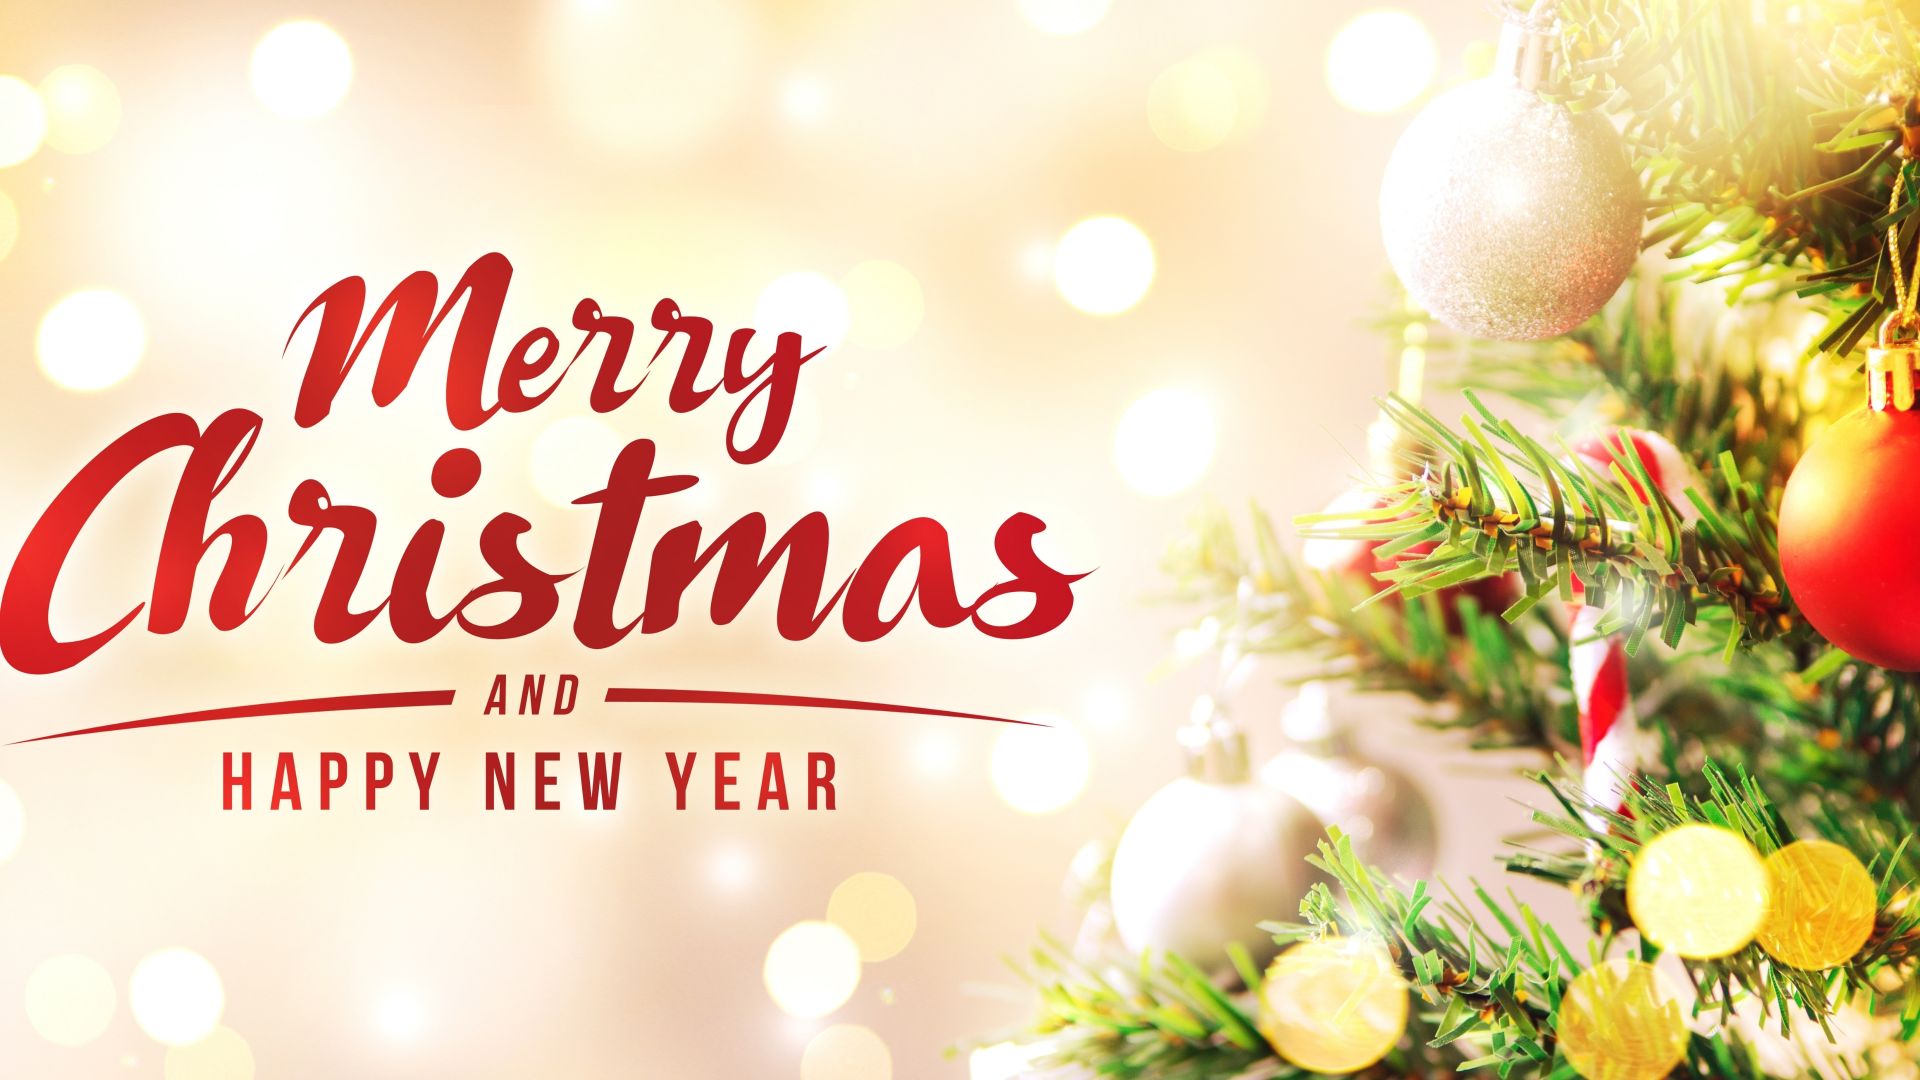 Merry Christmas and Happy new year Wallpaper Download on 24wallpaper